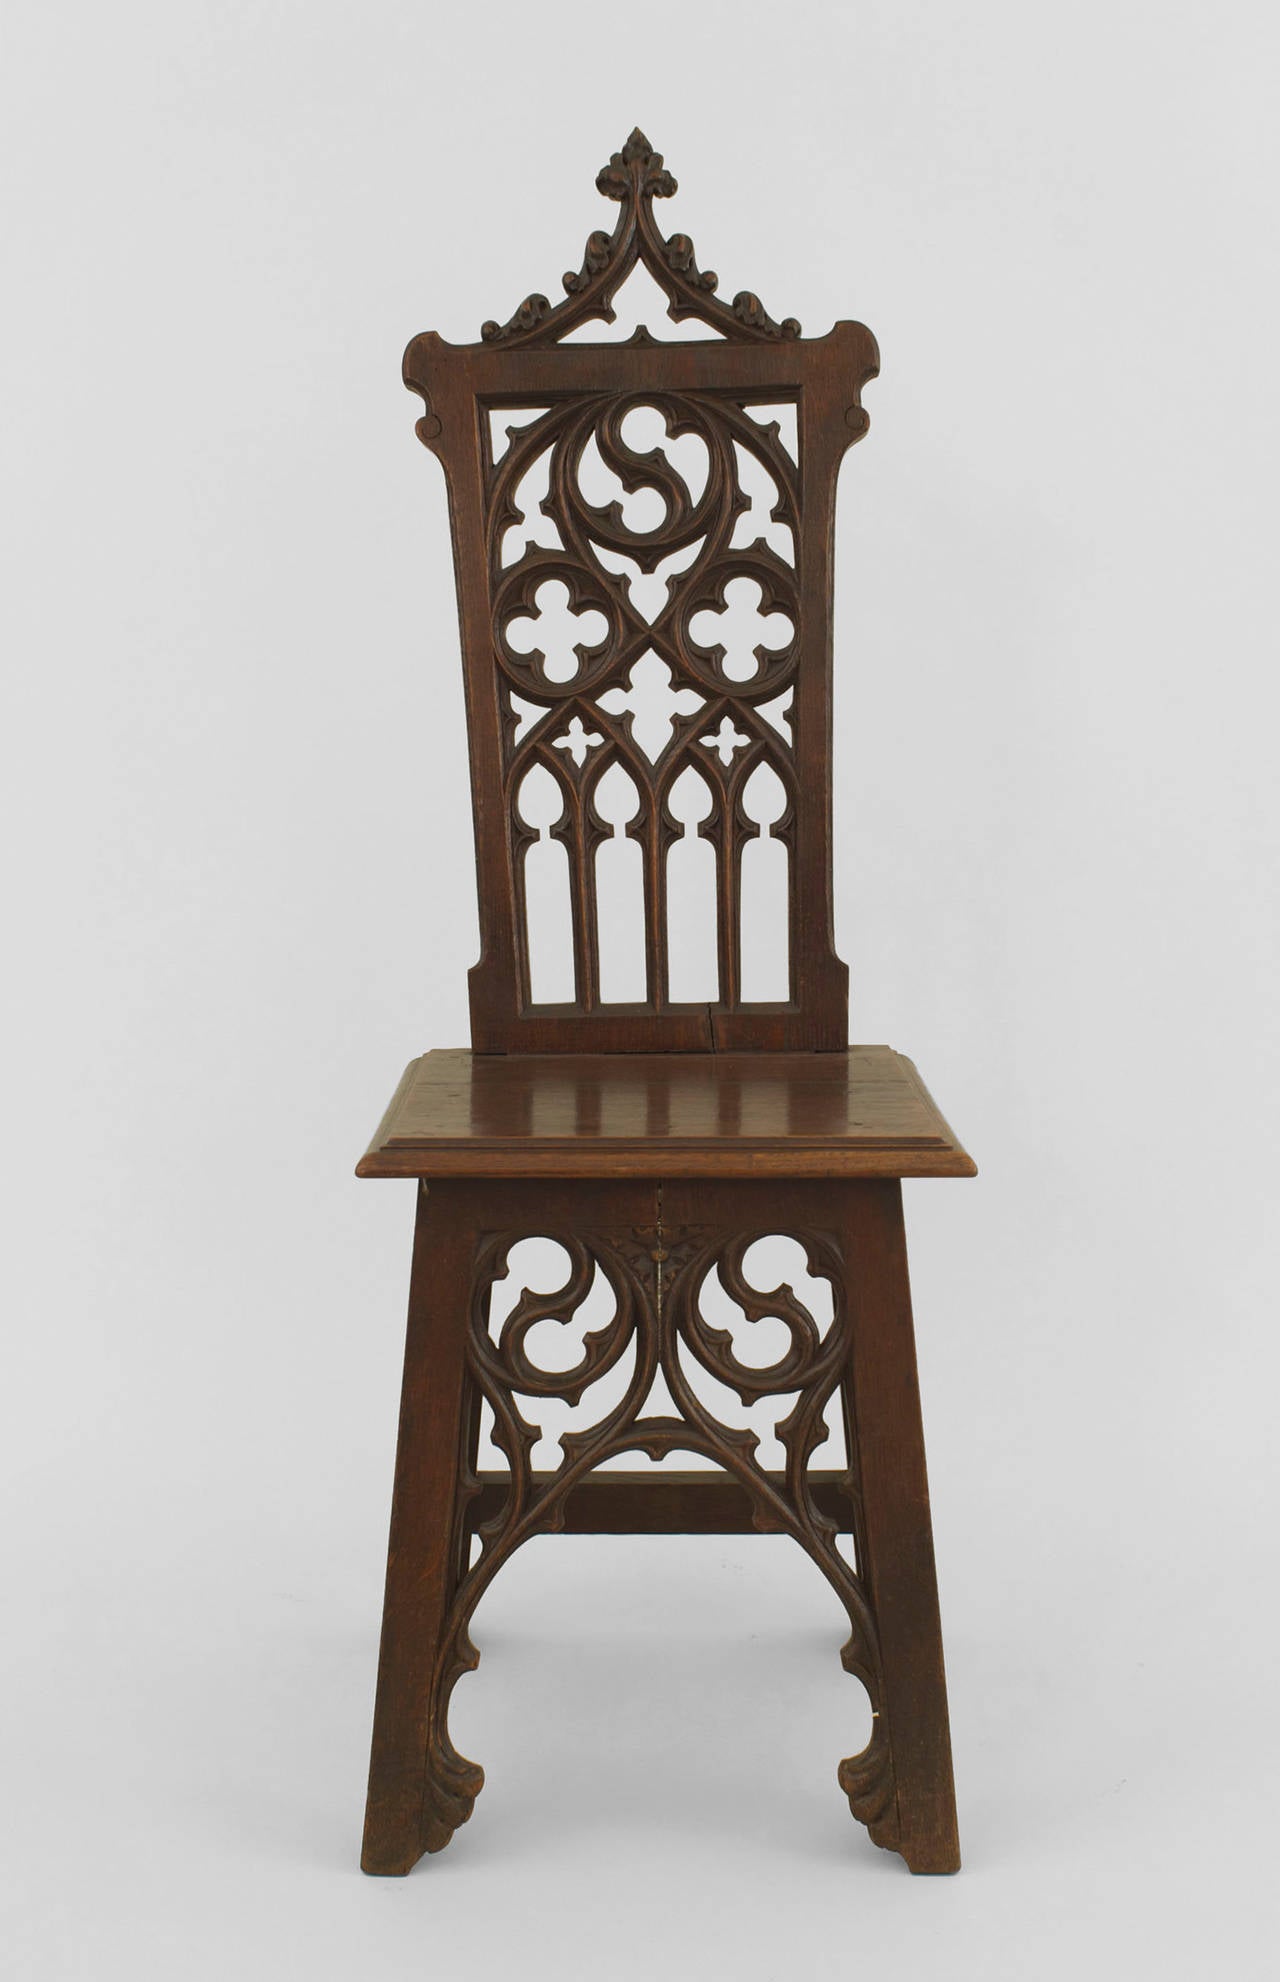 Pair of turn of the century English Gothic style oak side chairs with filigree pierced carved backs and wooden seats.